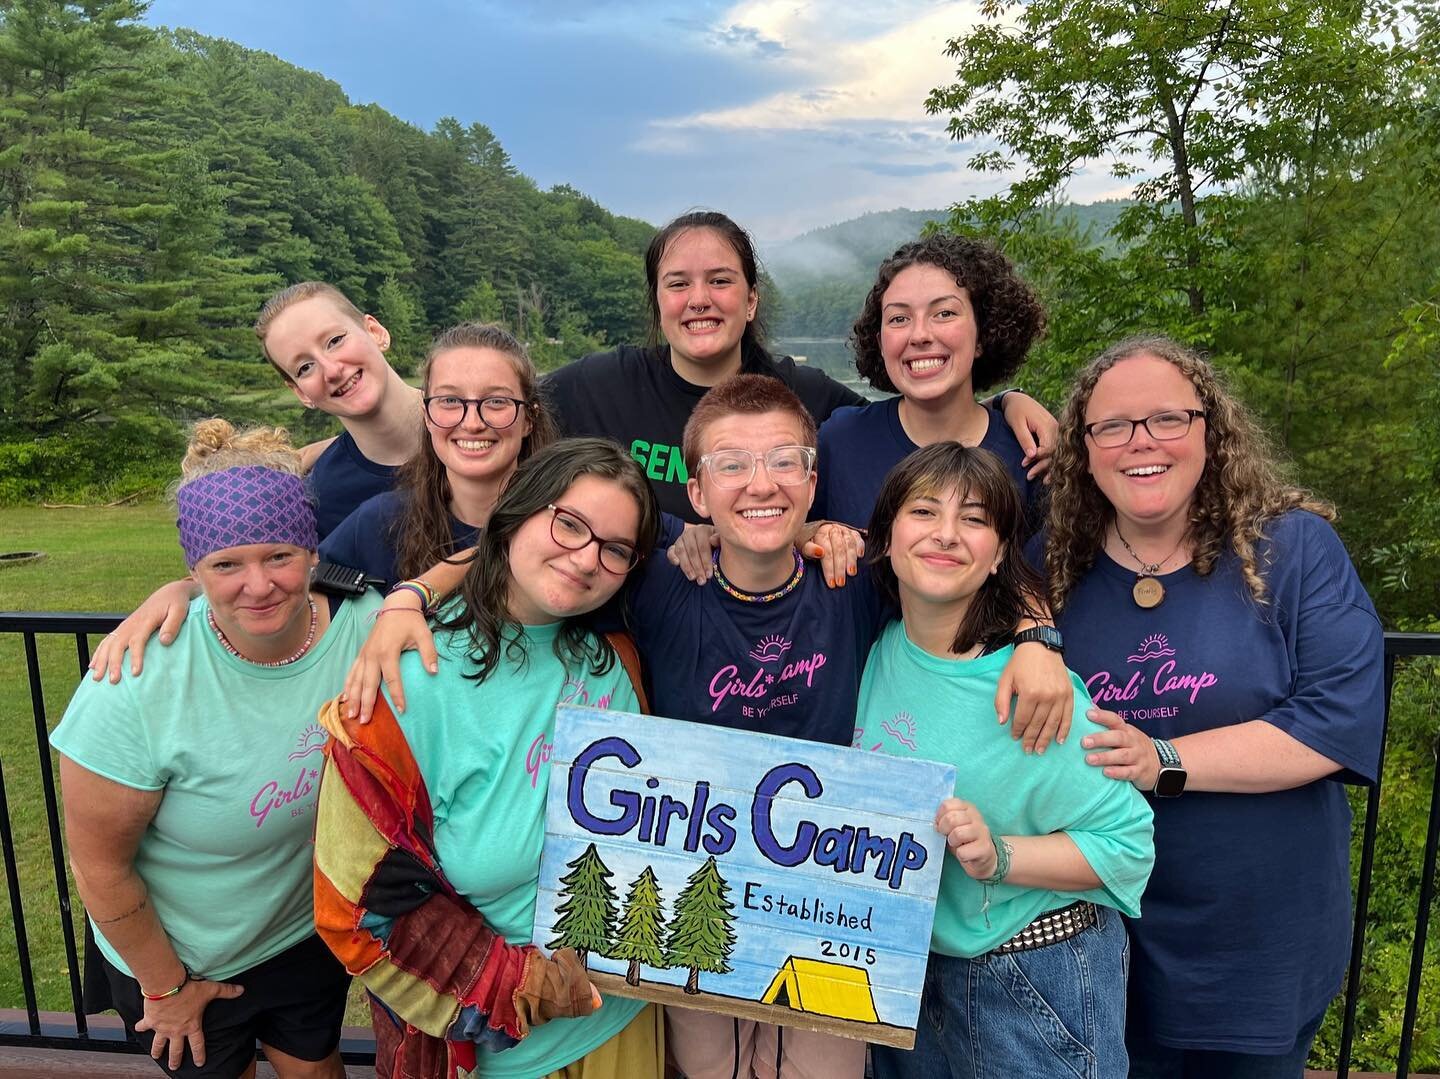 Girls* Camp counselors and CITs (counselors in training)!
&mdash;
Photo credit: @mmoughty